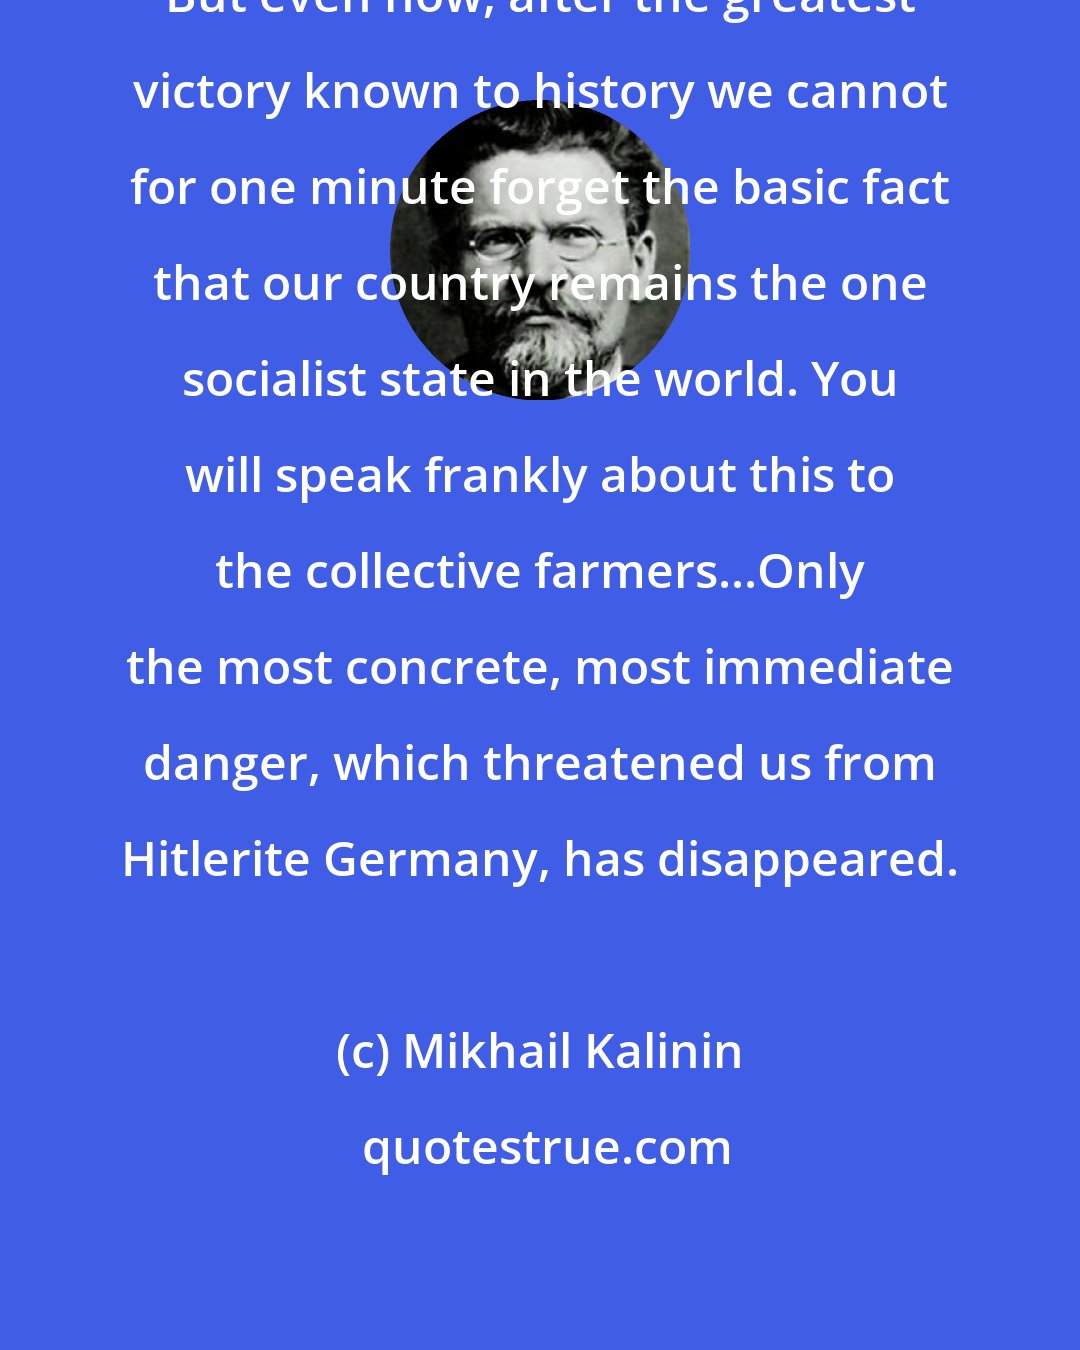 Mikhail Kalinin: But even now, after the greatest victory known to history we cannot for one minute forget the basic fact that our country remains the one socialist state in the world. You will speak frankly about this to the collective farmers...Only the most concrete, most immediate danger, which threatened us from Hitlerite Germany, has disappeared.